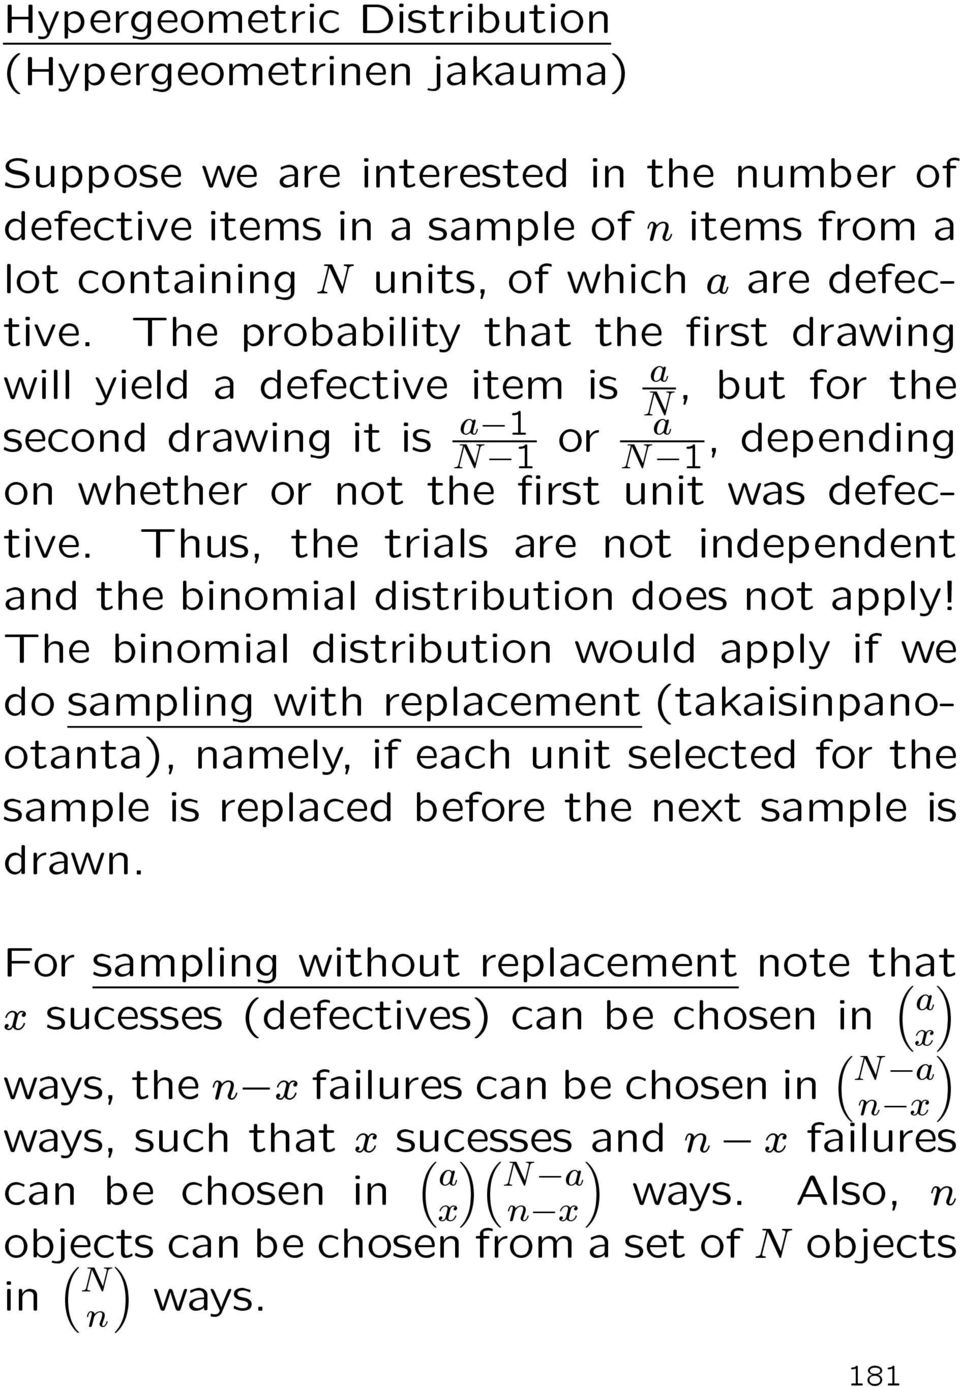 Thus, the trials are not independent and the binomial distribution does not apply!